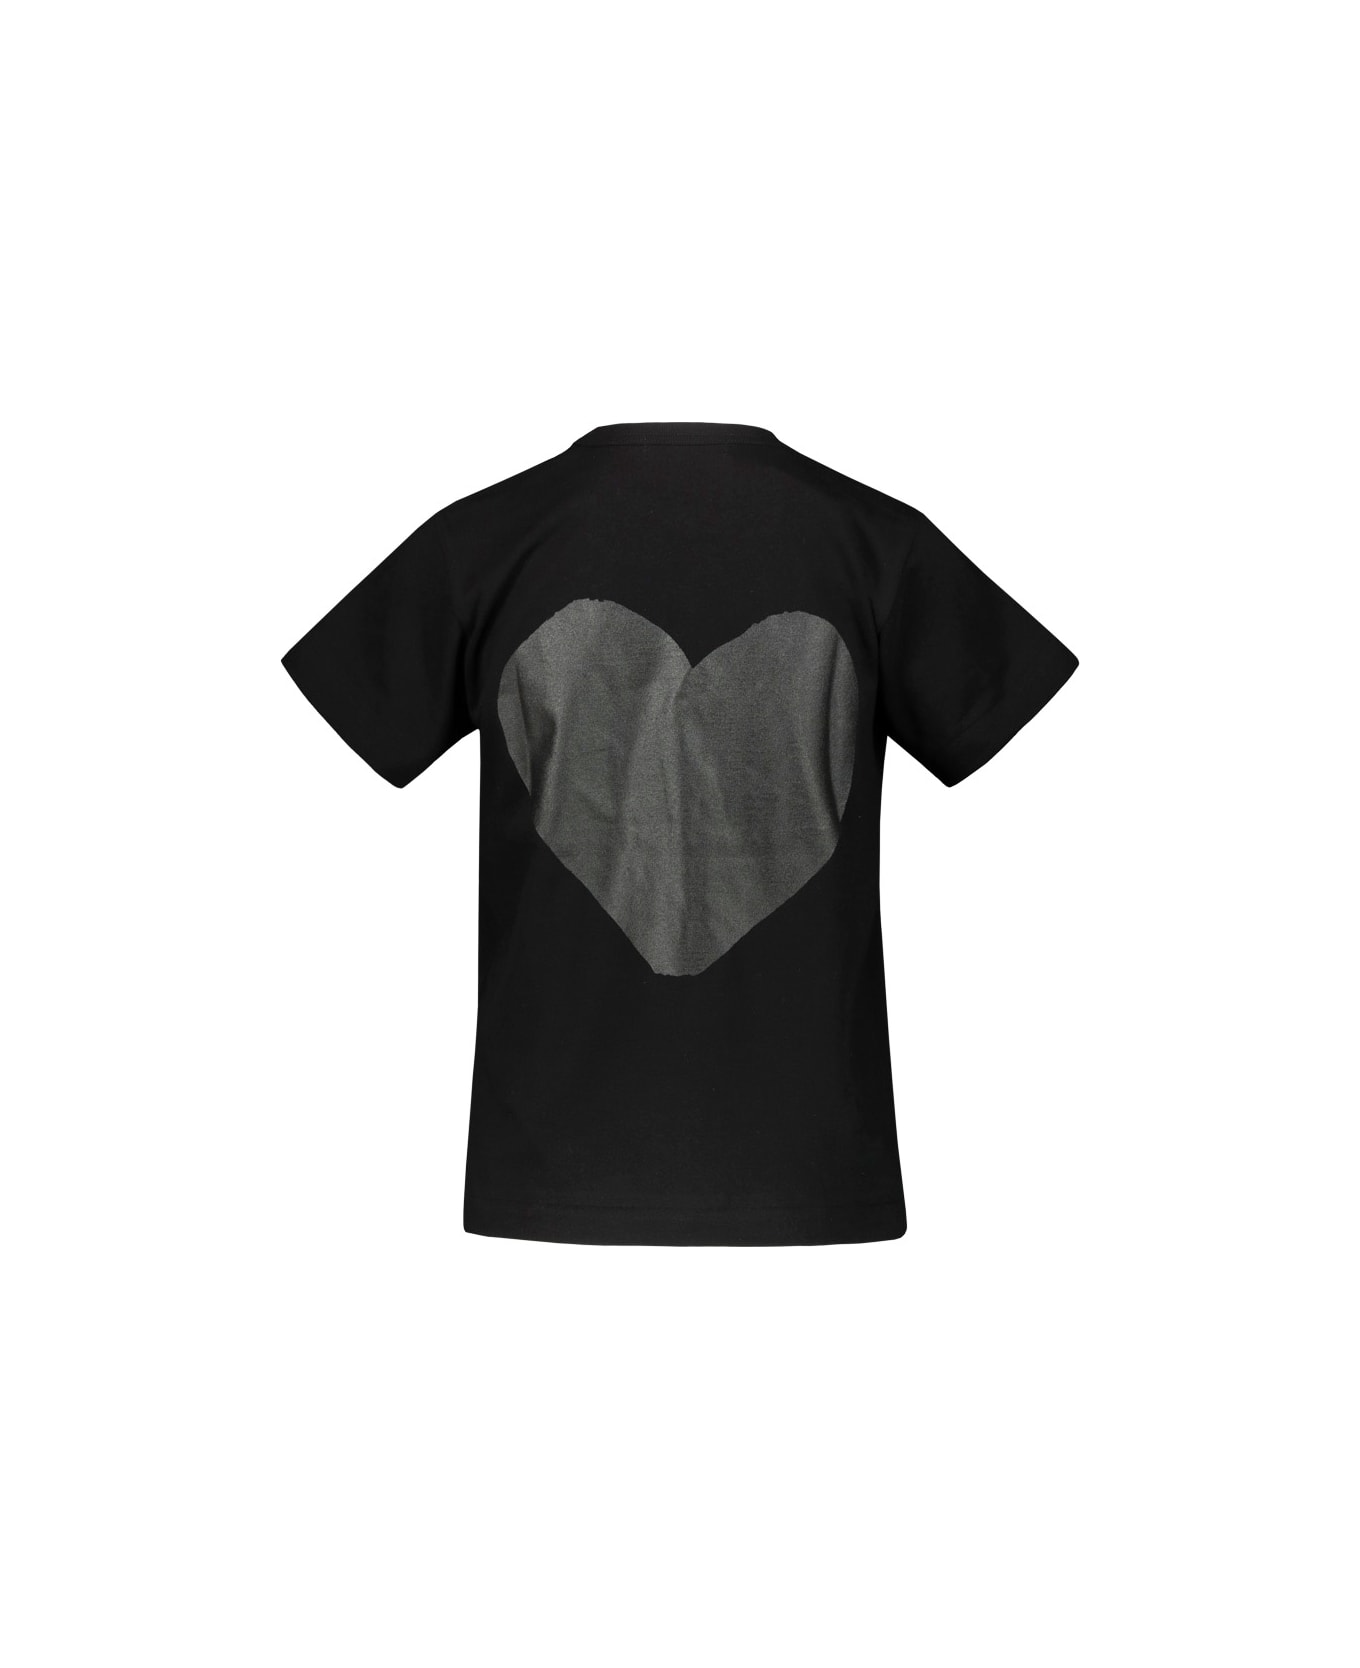 Comme des Garçons Play Black Short Sleeve T-shirt With Black Printed Heart On The Front And Back - Blk